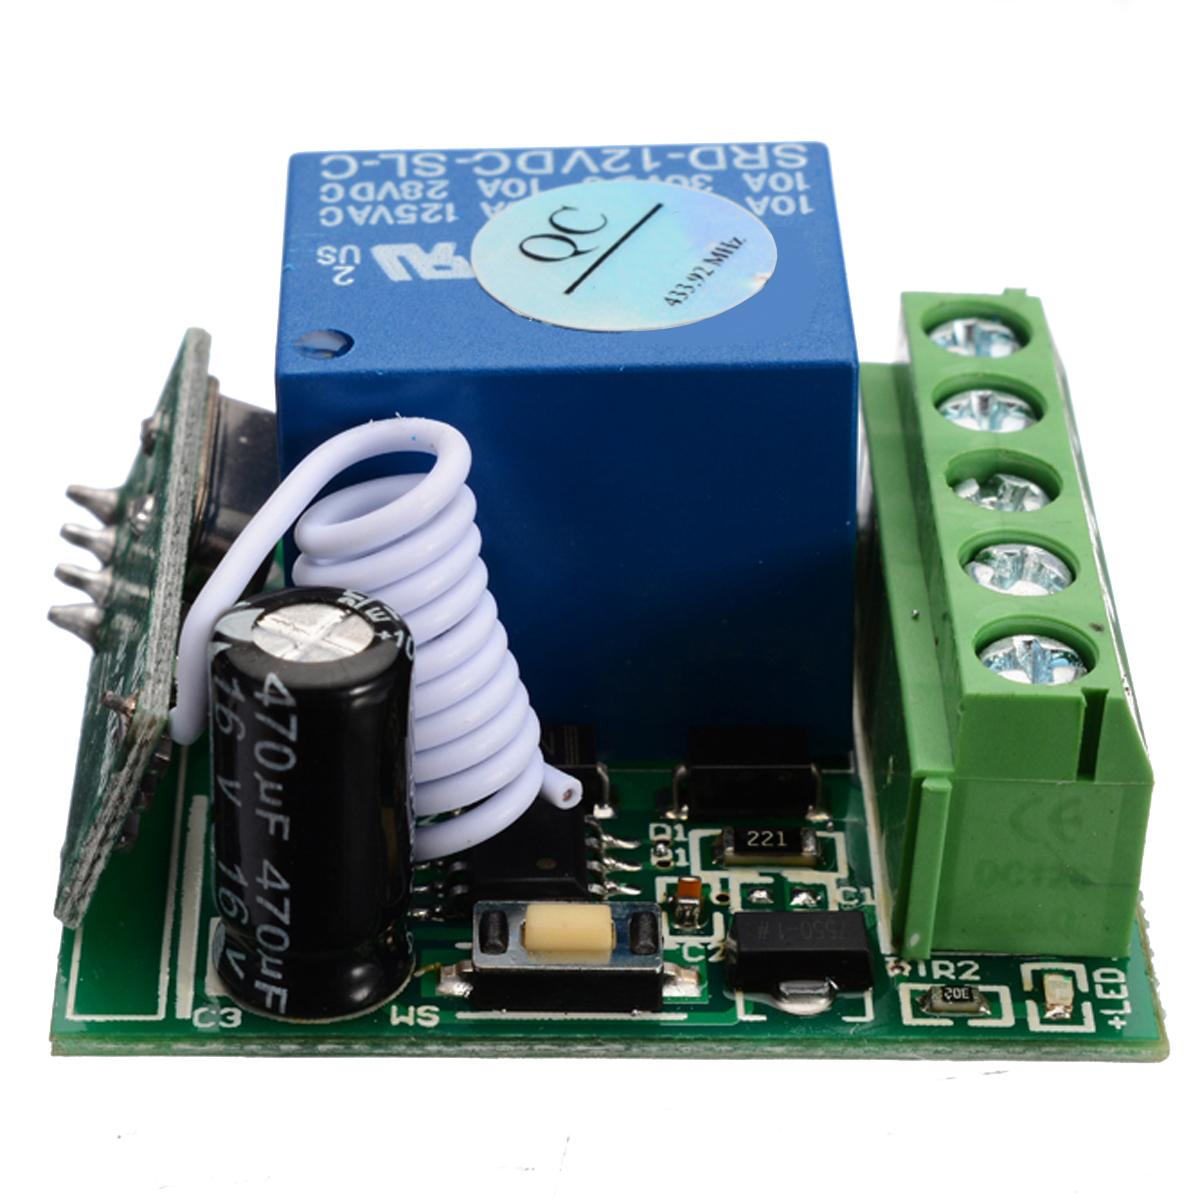 1 Channel Wireless Relay Switch Receiver Module 12V 10A Wireless Relay RF 433MHZ Remote Control Switch Transmitter